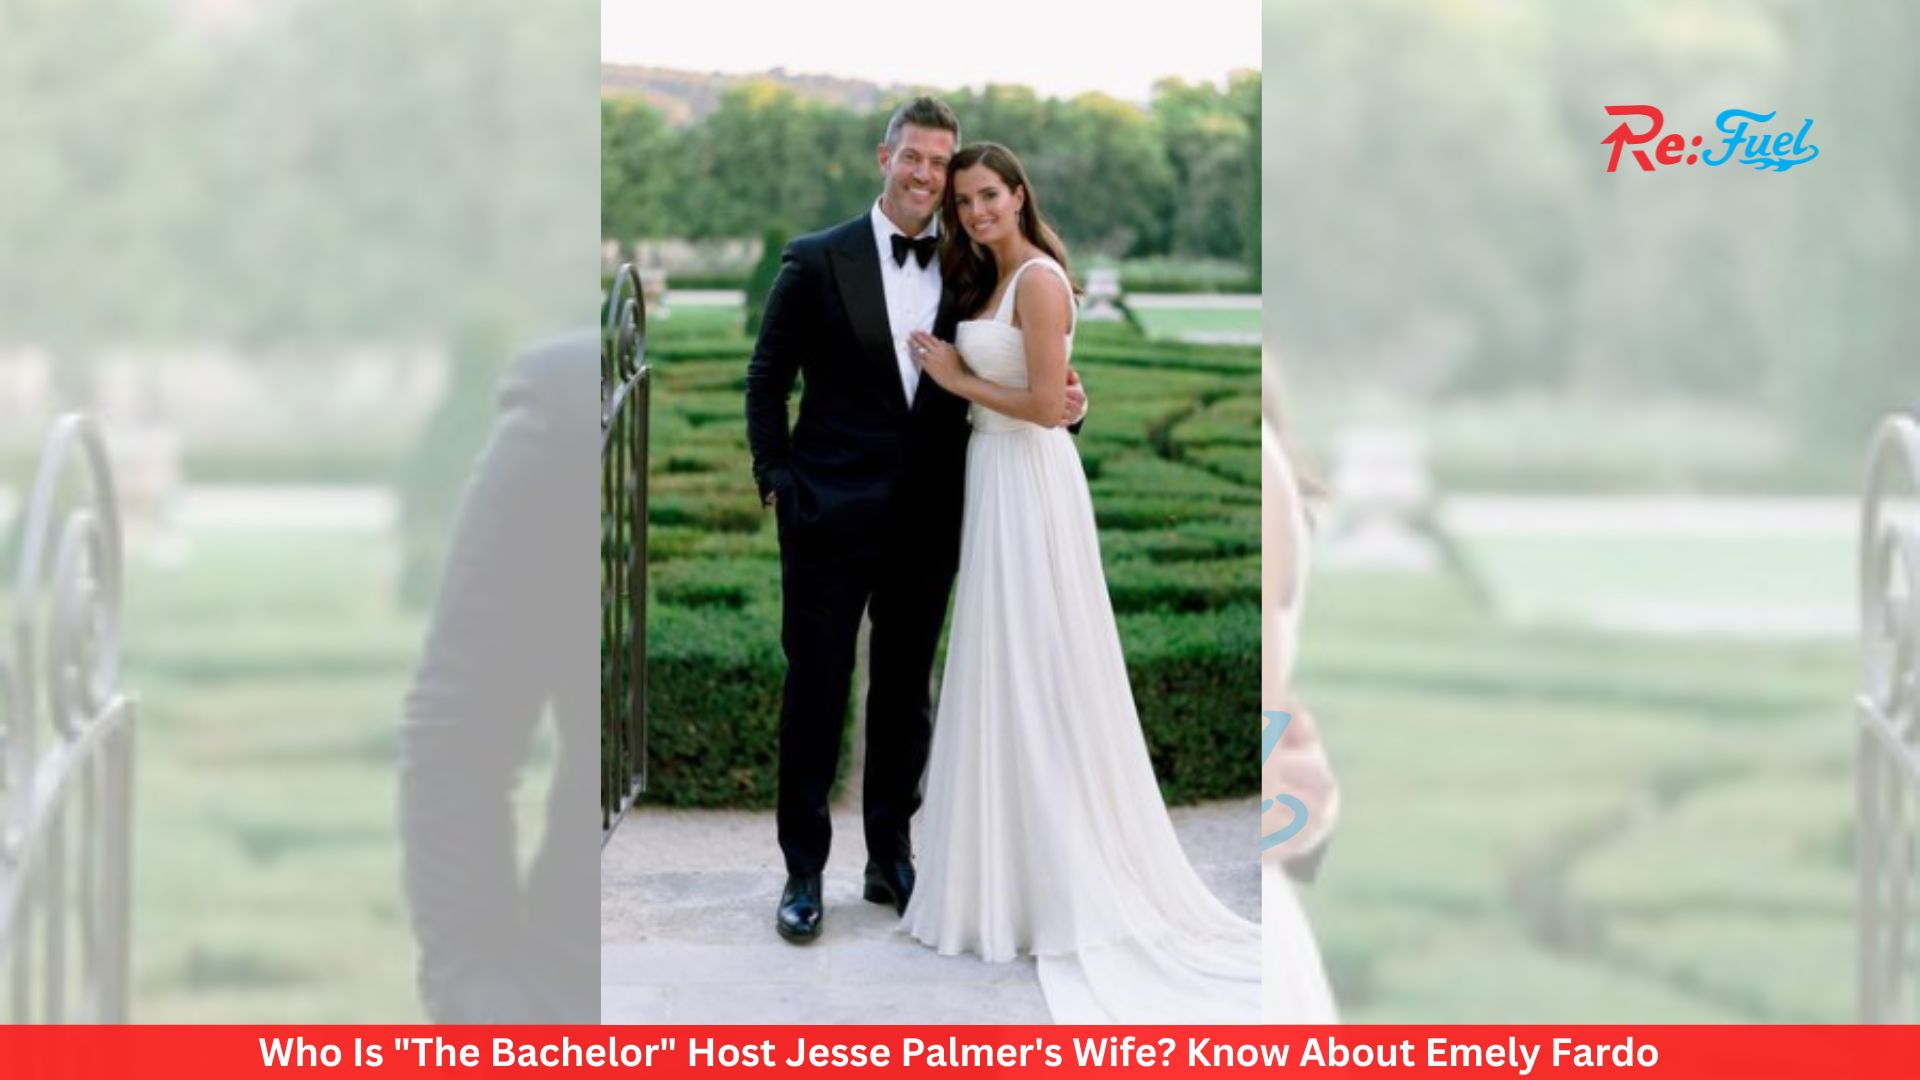 Who Is "The Bachelor" Host Jesse Palmer's Wife? Know About Emely Fardo